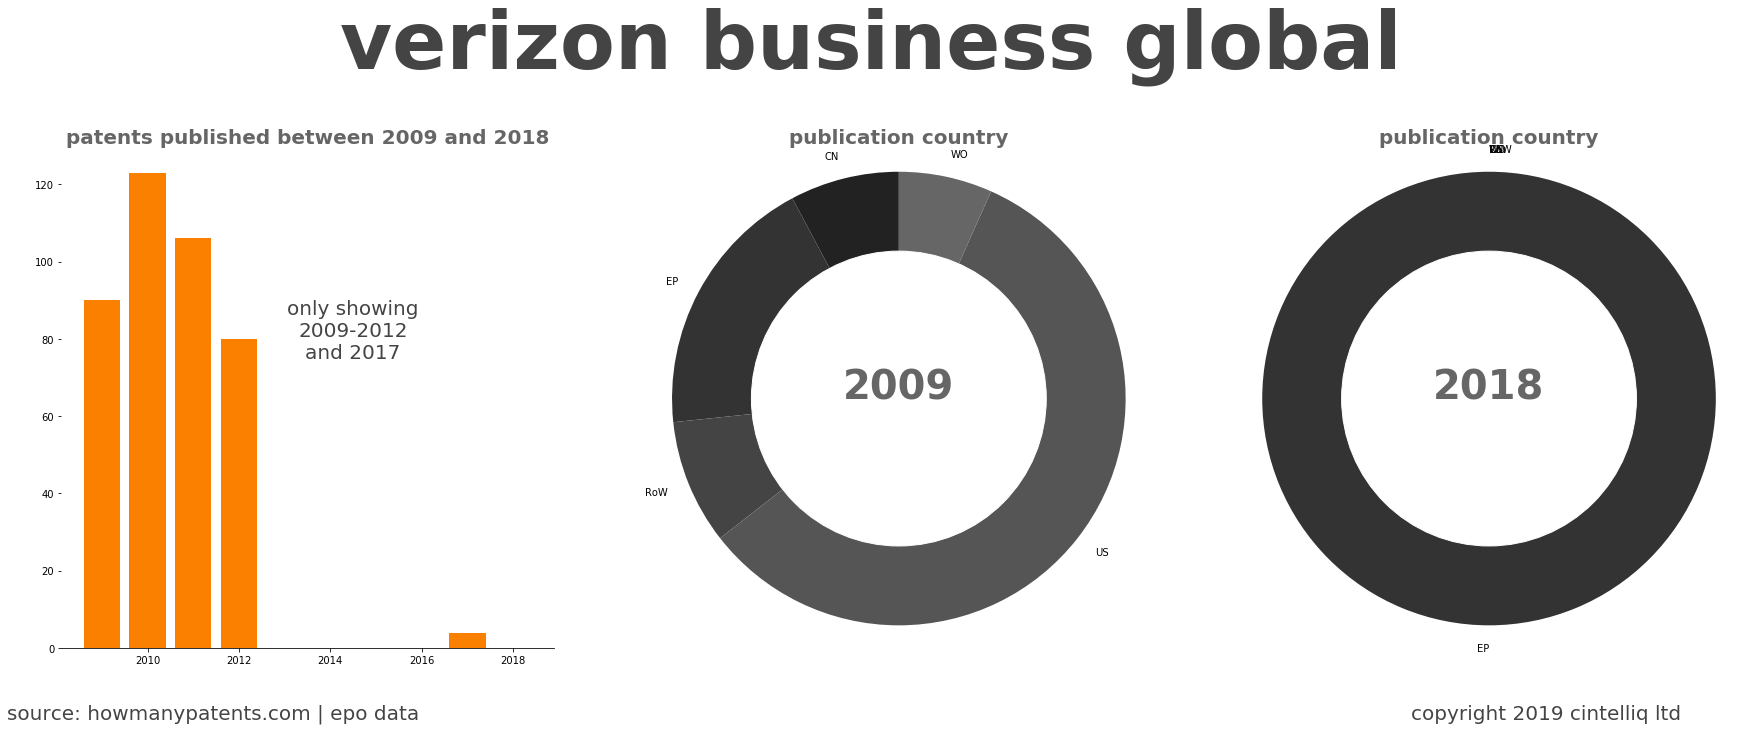 summary of patents for Verizon Business Global